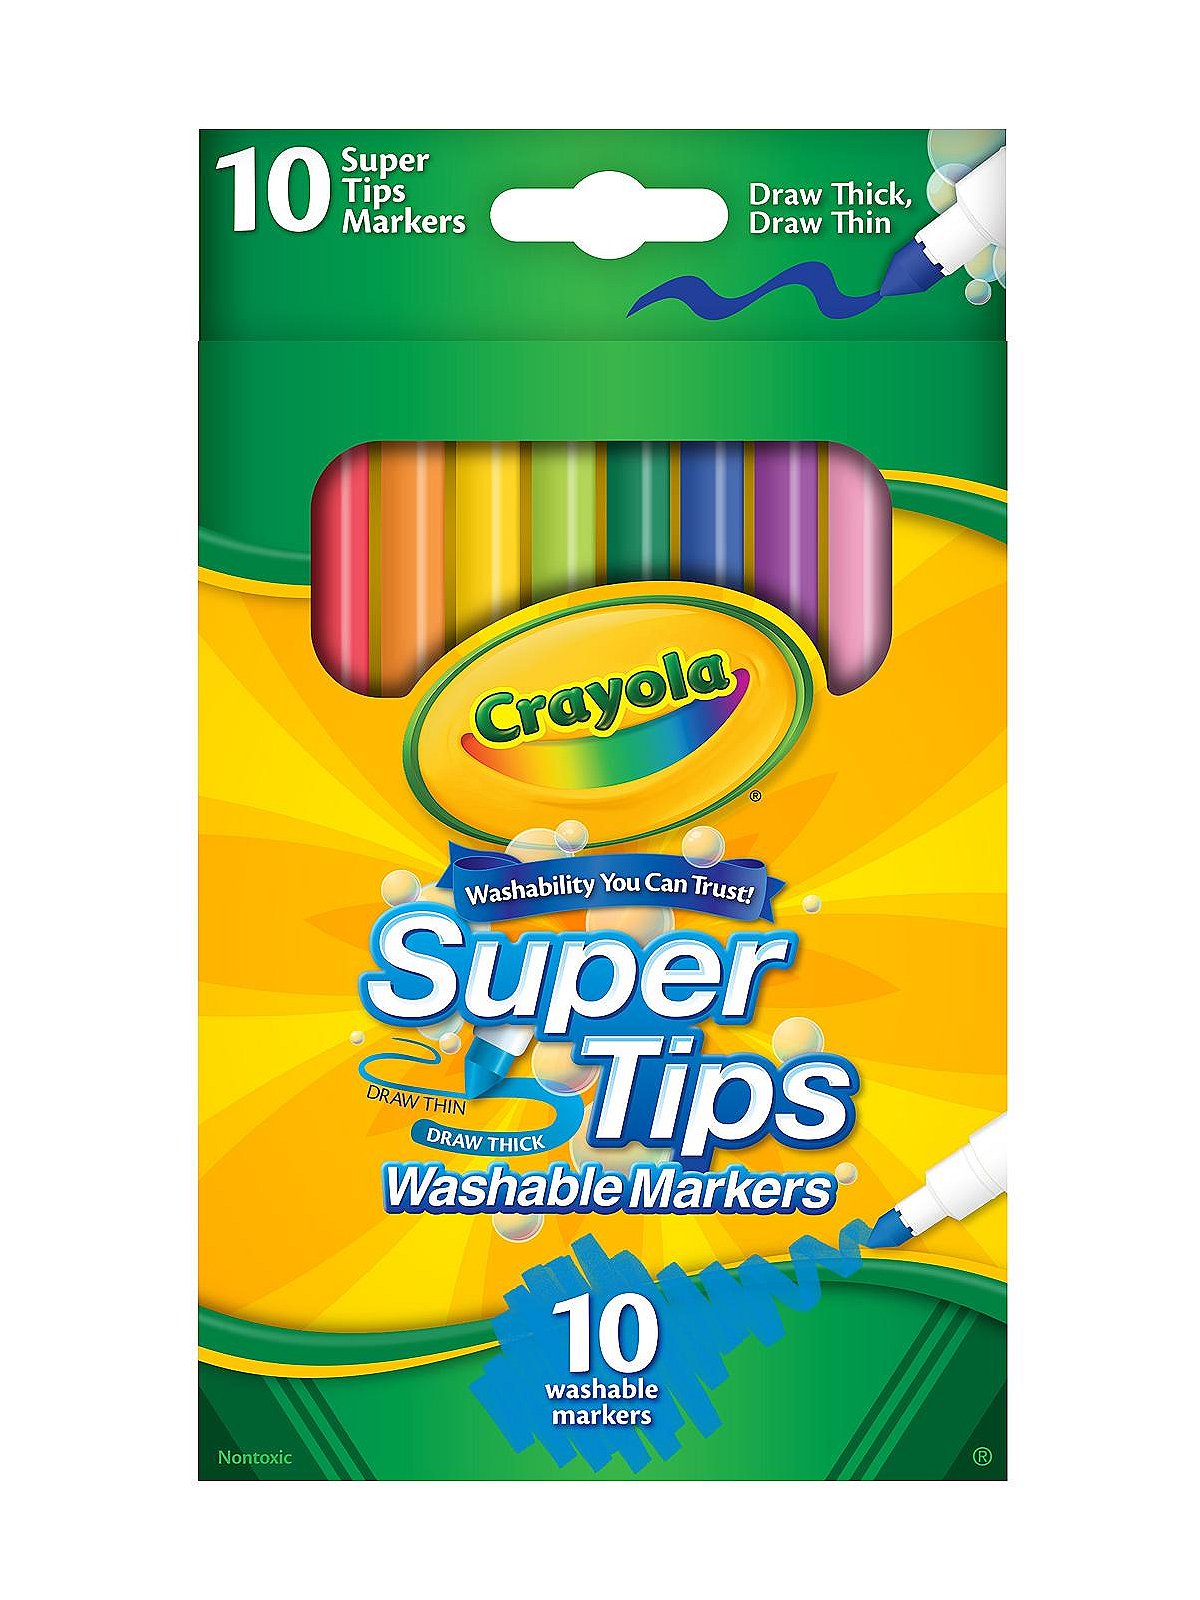 Crayola Super Tips Marker Swatches (50 pack) 